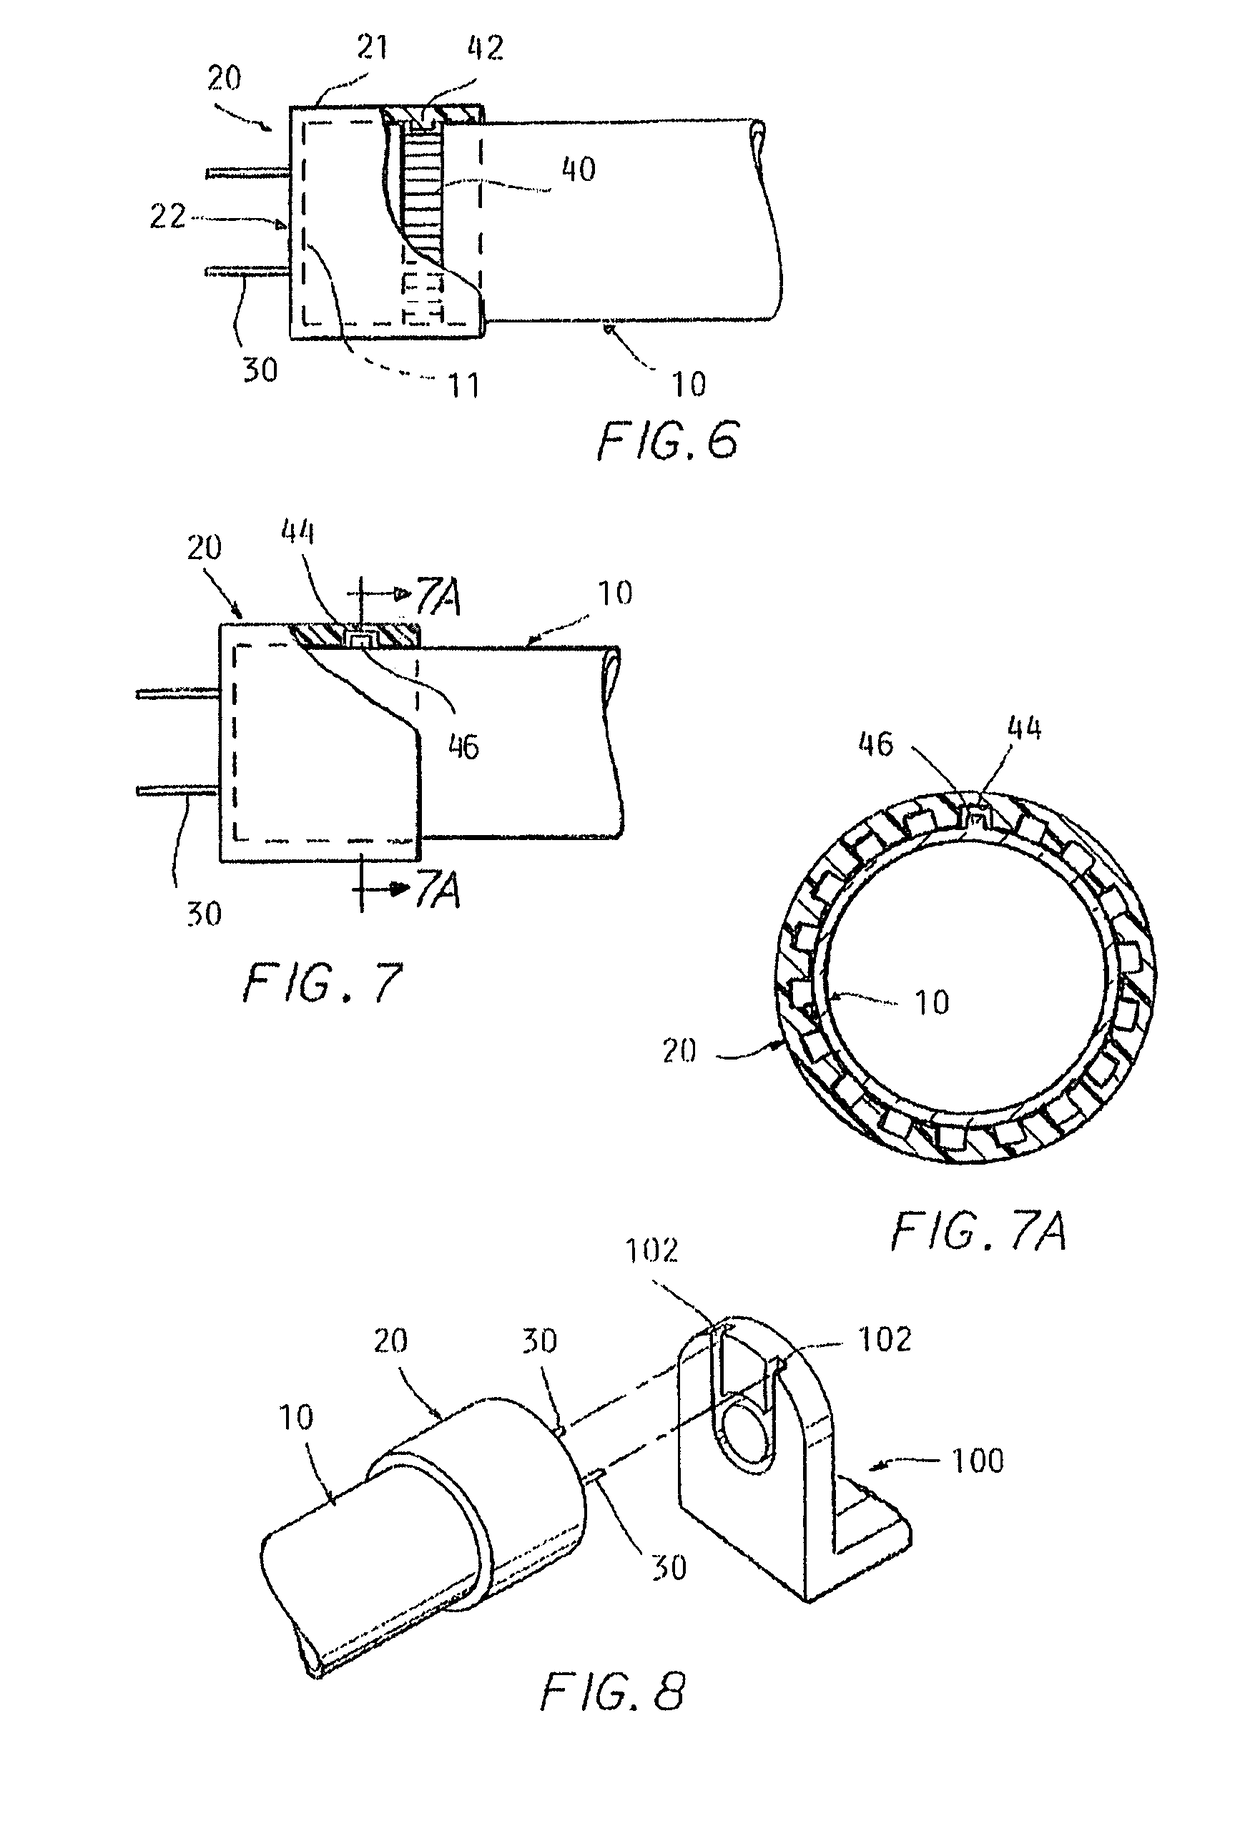 LED lighting apparatus with swivel connection